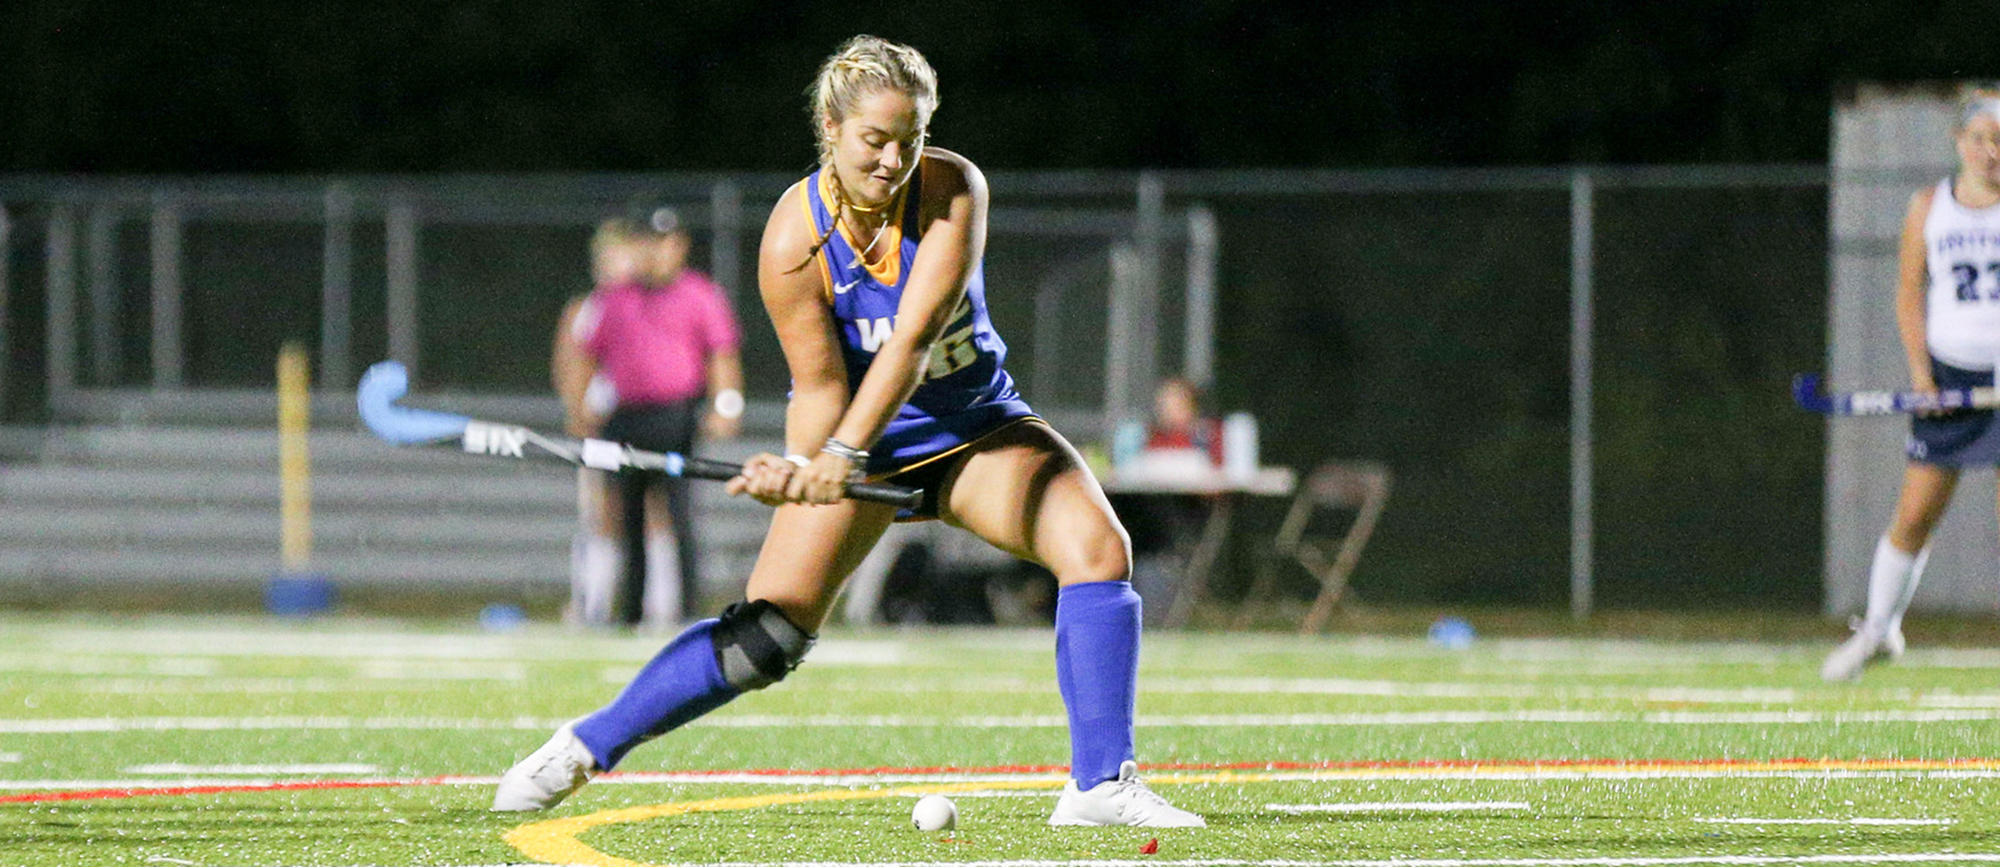 Ali Martin scored her first goal of the season in Western New England's 4-1 loss to Endicott on Friday night. (Photo by Chris Marion)